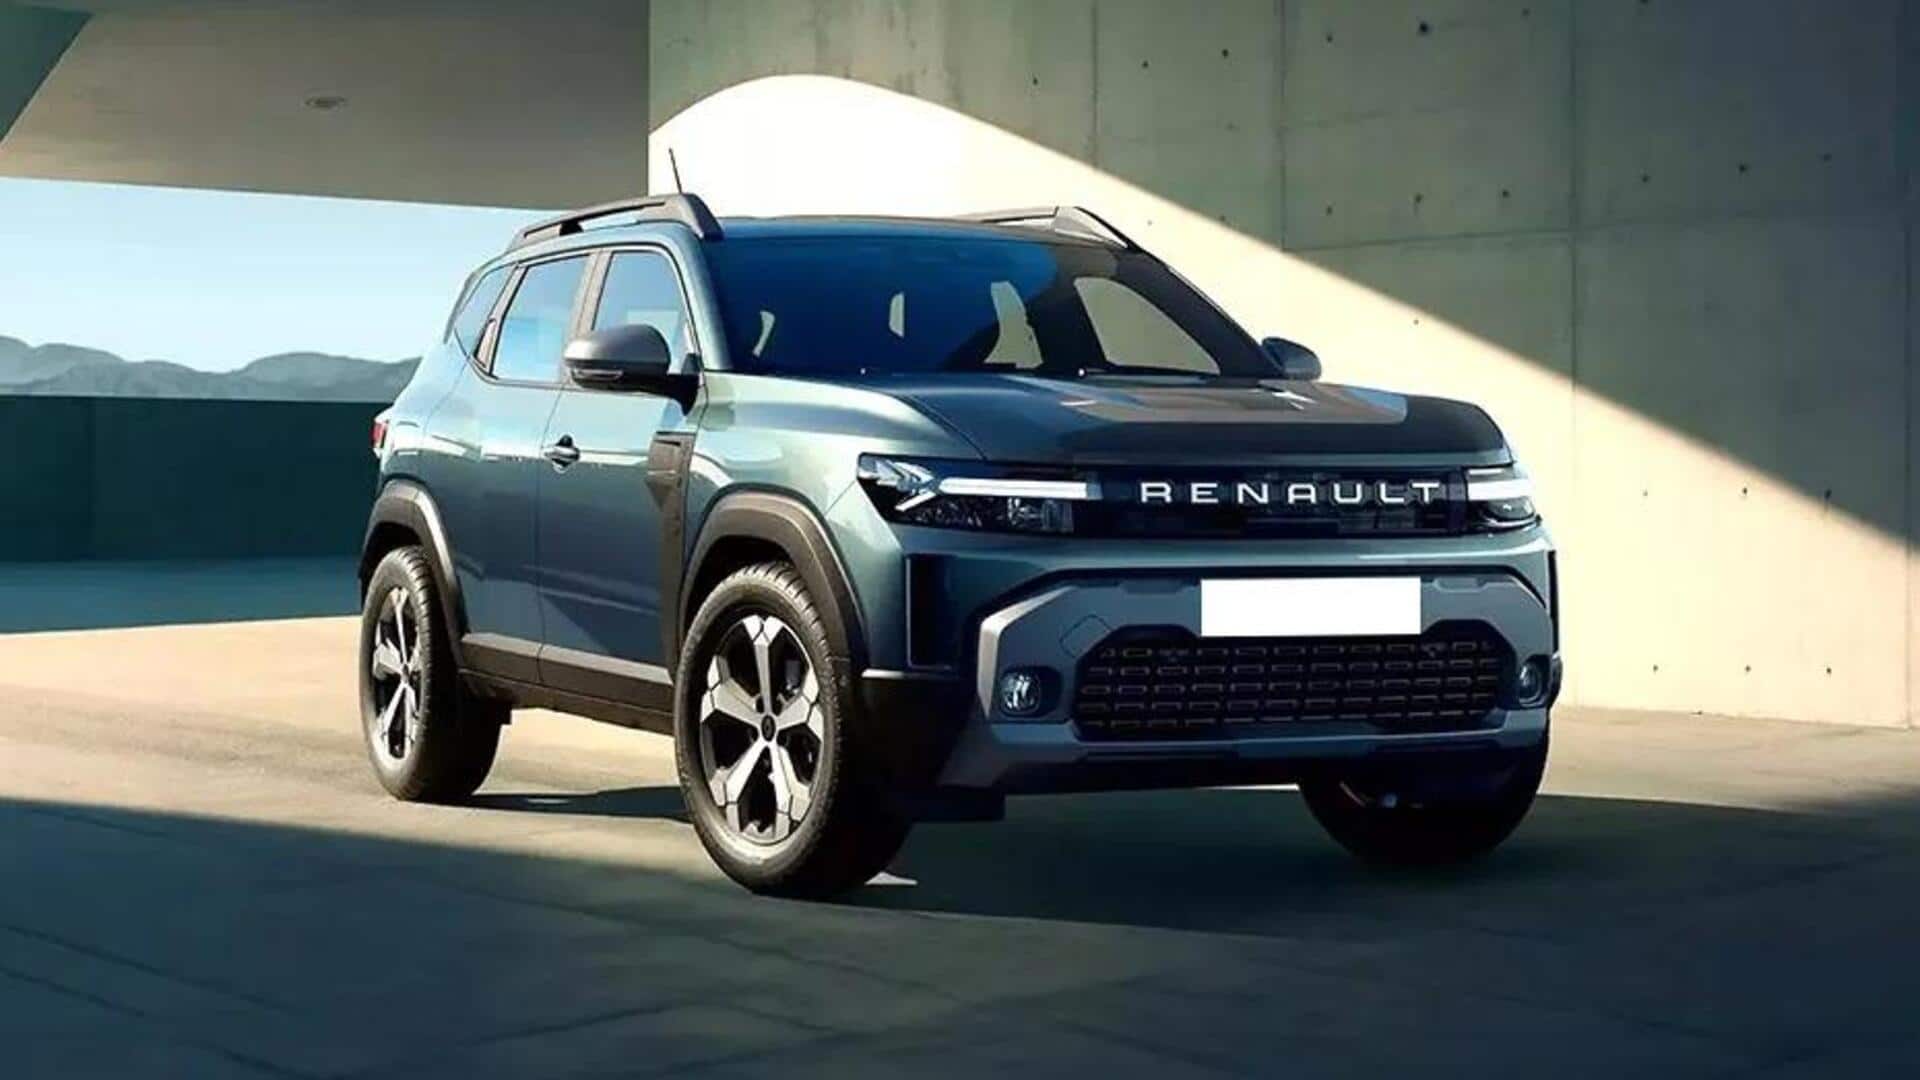 Renault's upcoming 3-row Duster spotted testing in India: Expected features